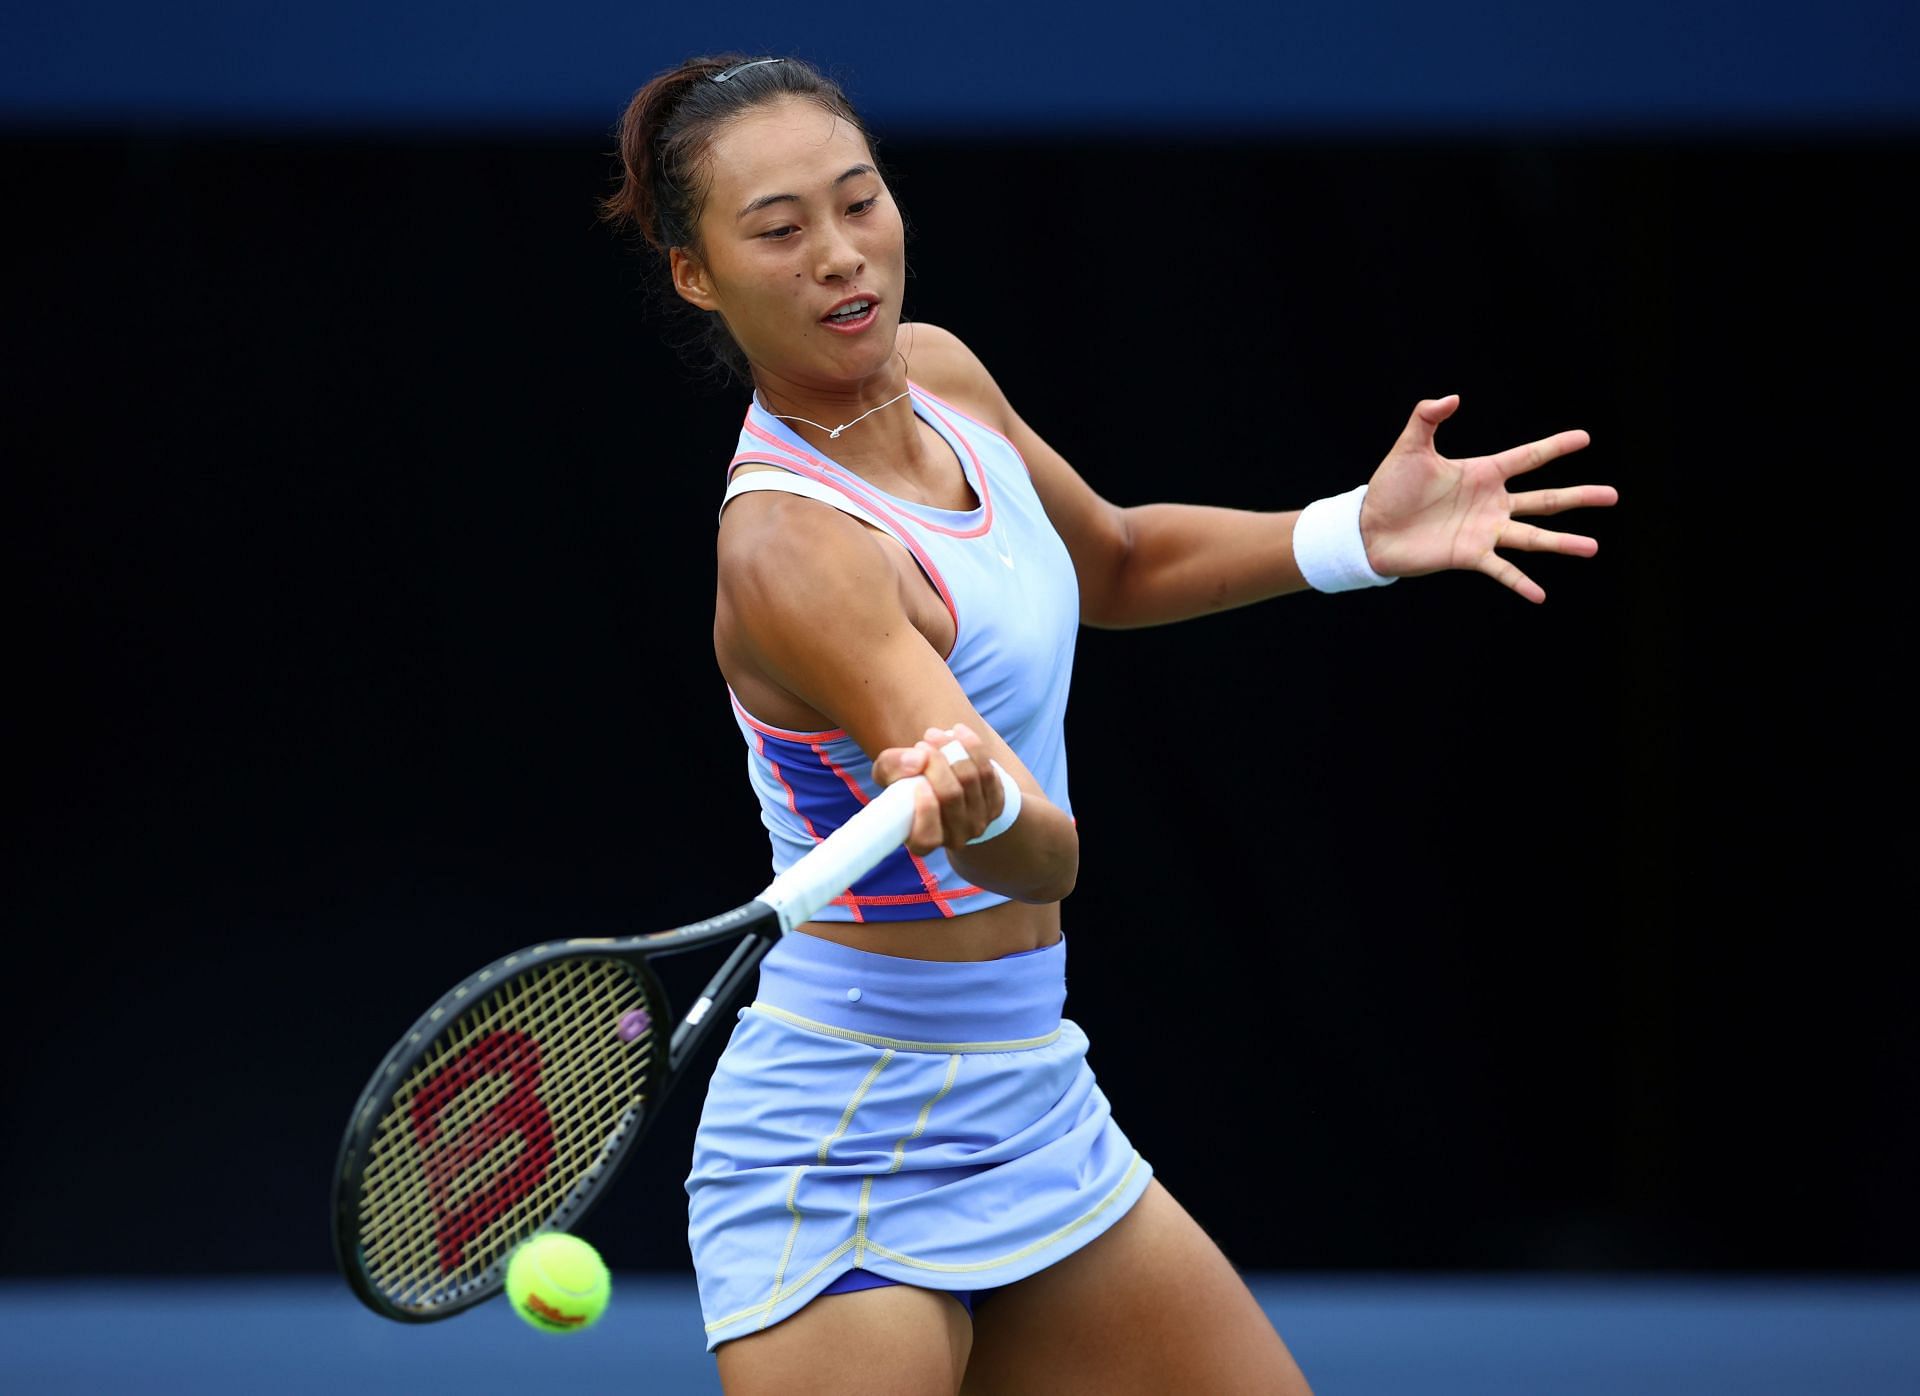 Zheng in action at the Canadian Open in Toronto